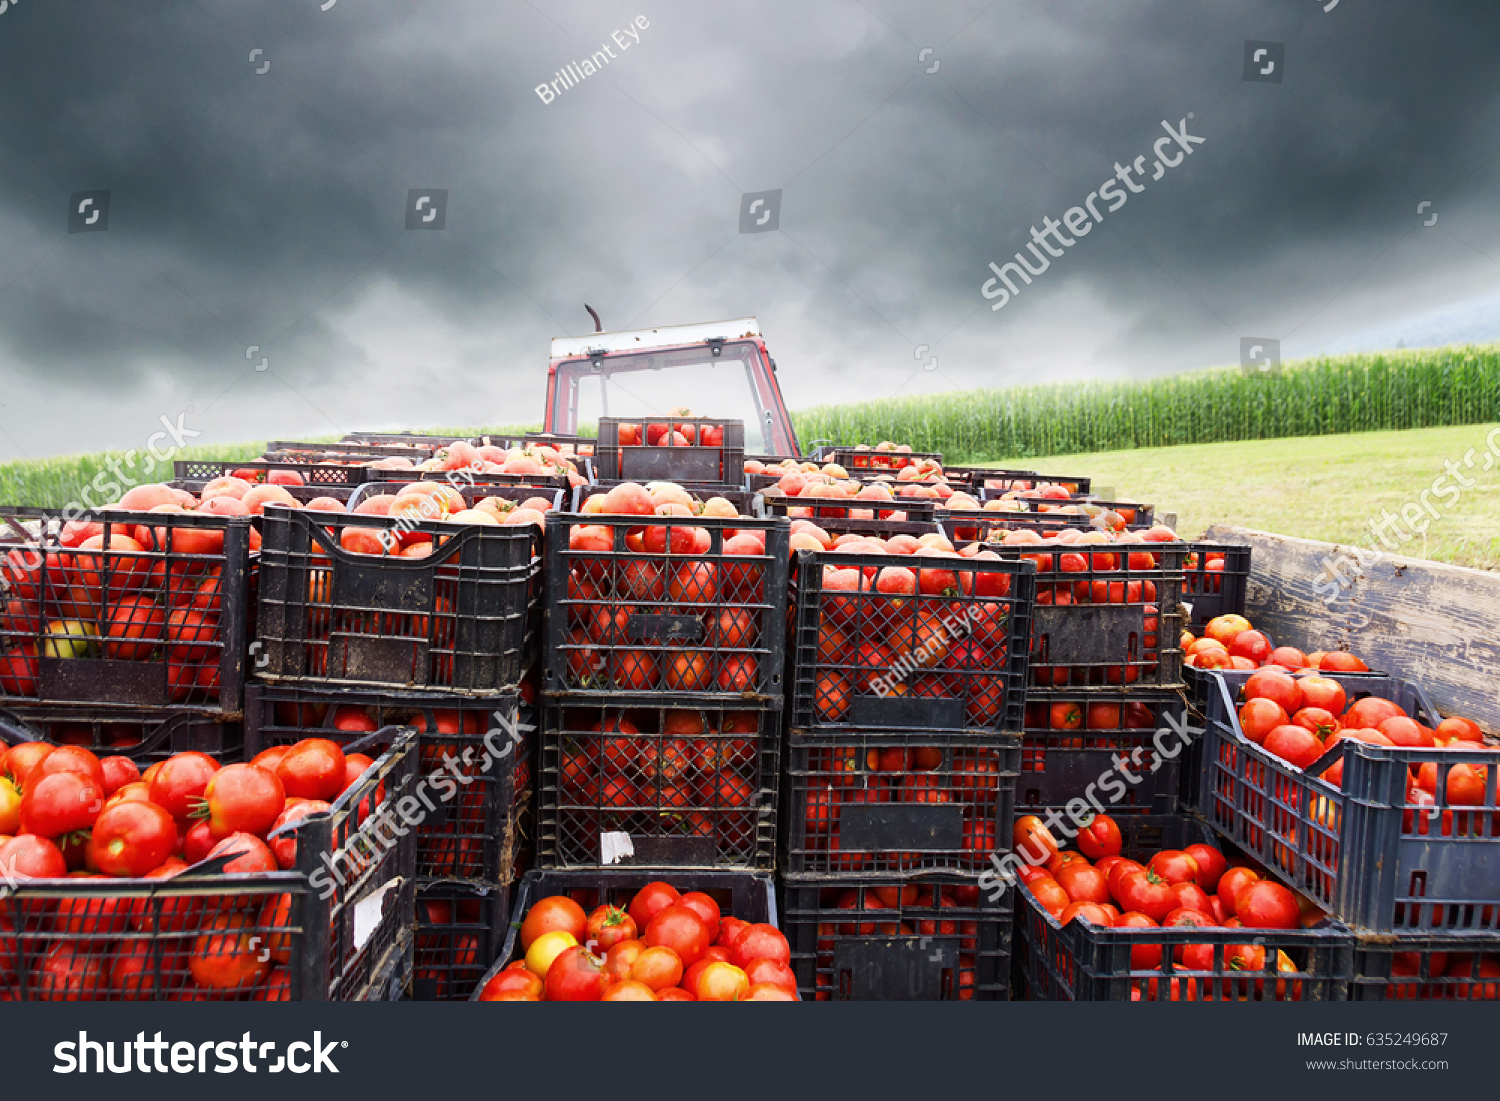 tractor charged with crates filled by red tomatoes to transport them to market #635249687